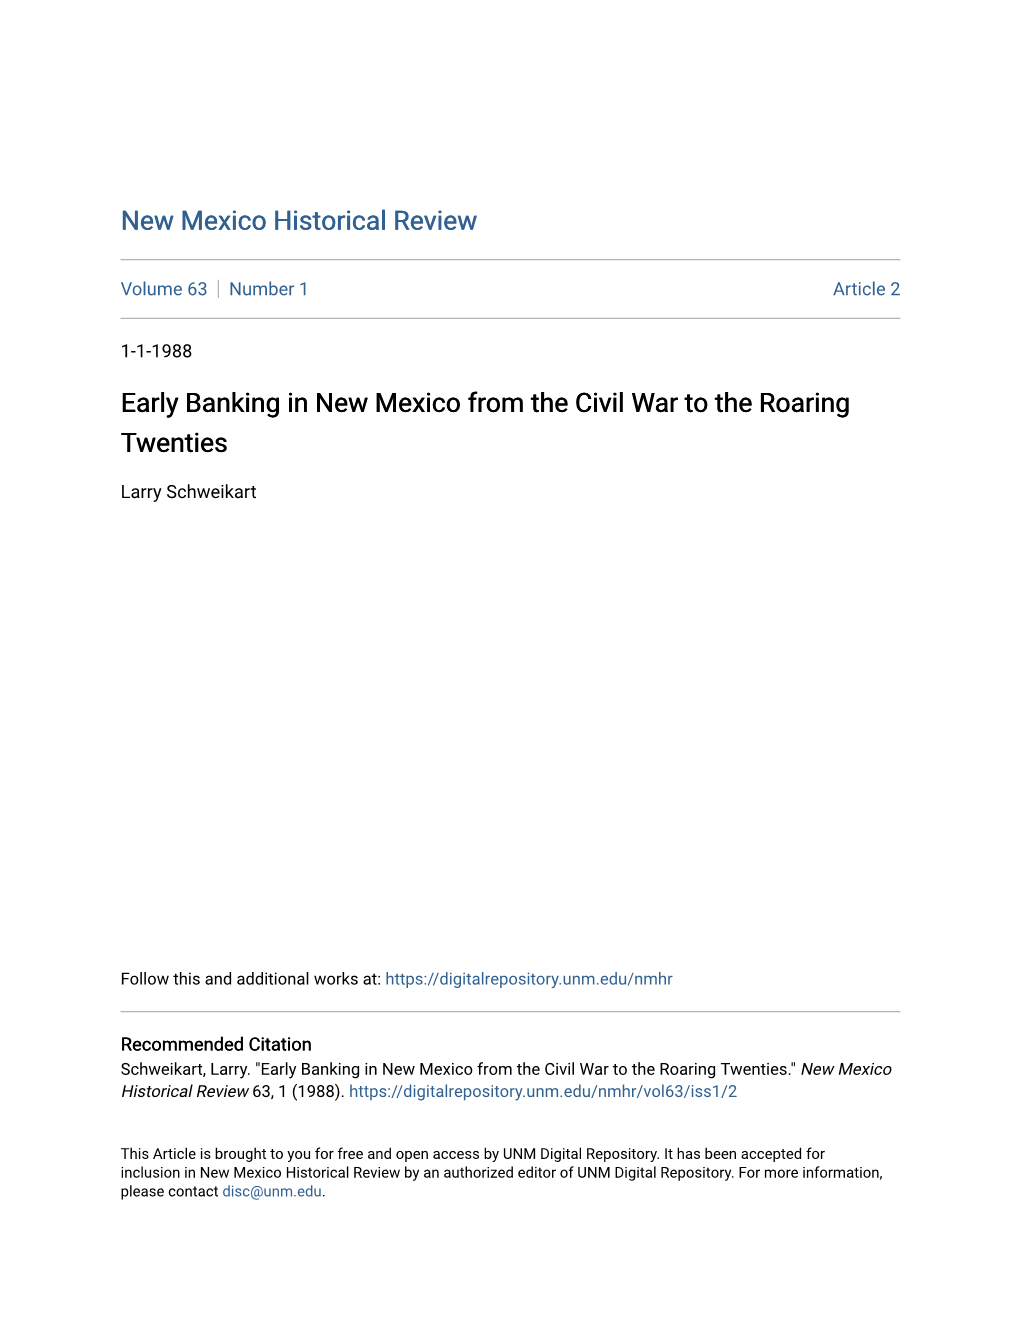 Early Banking in New Mexico from the Civil War to the Roaring Twenties